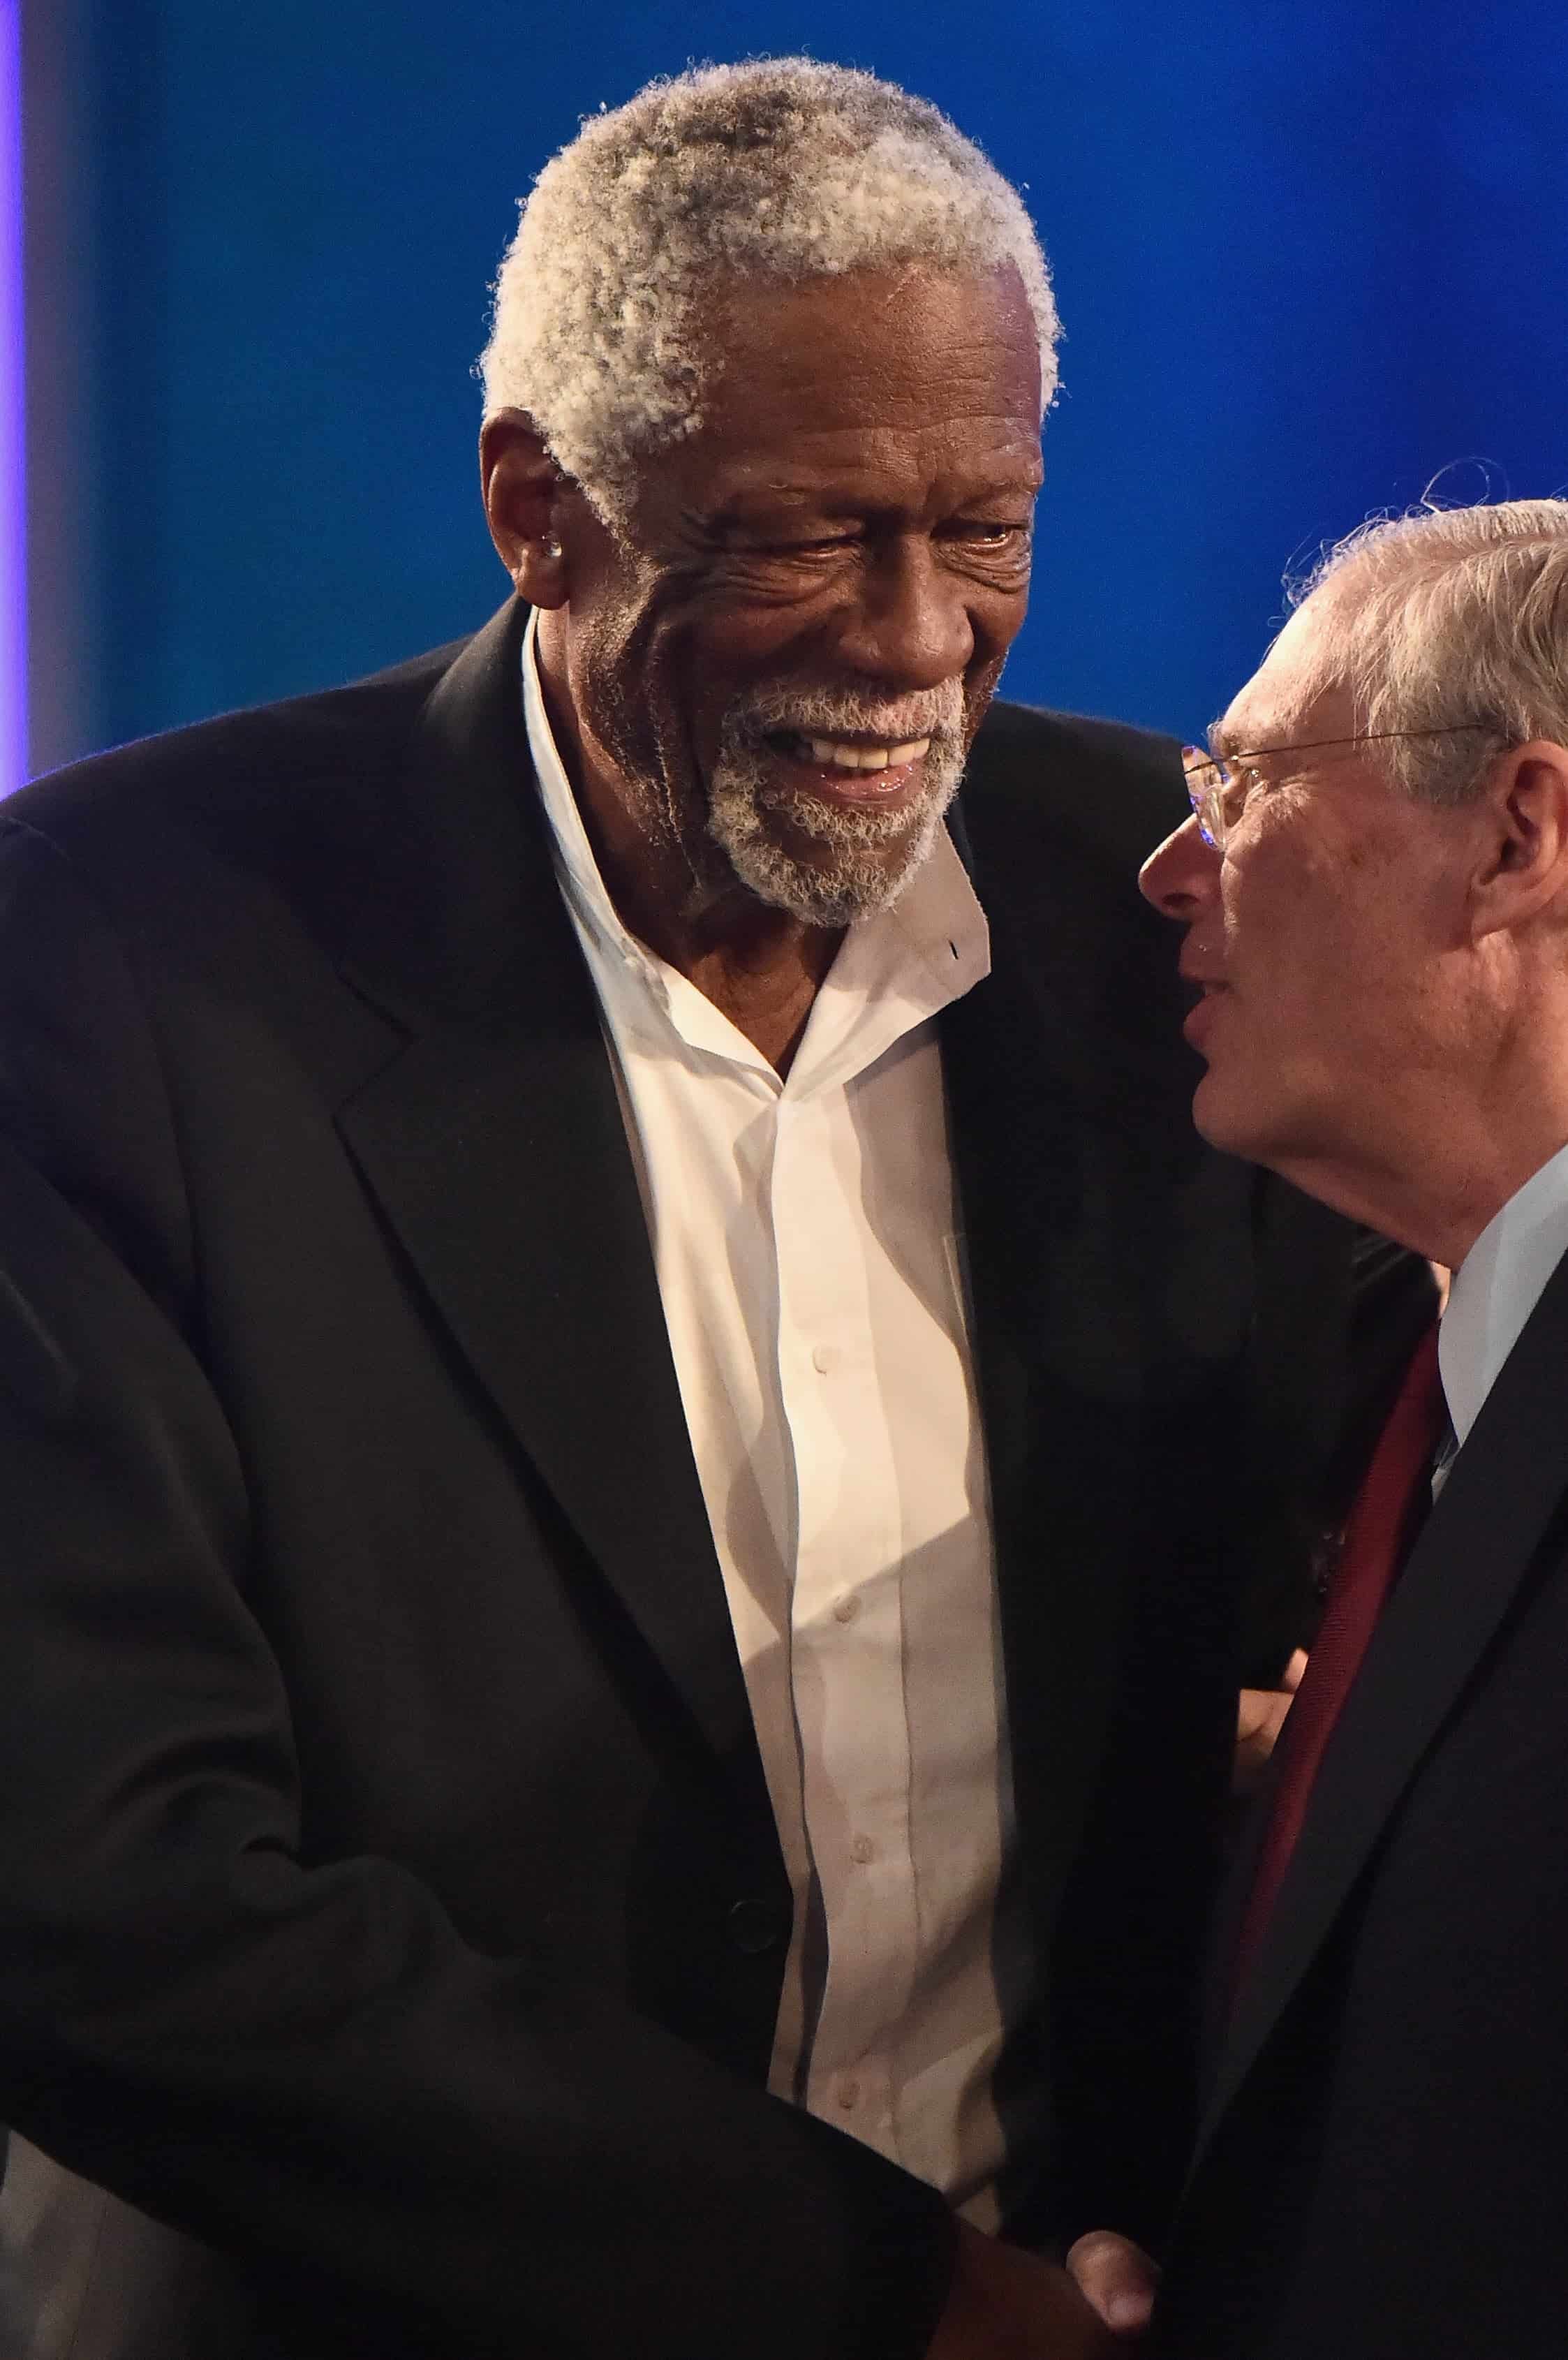 Basketball Legend Bill Russell Passes Away At 88-Years-Old